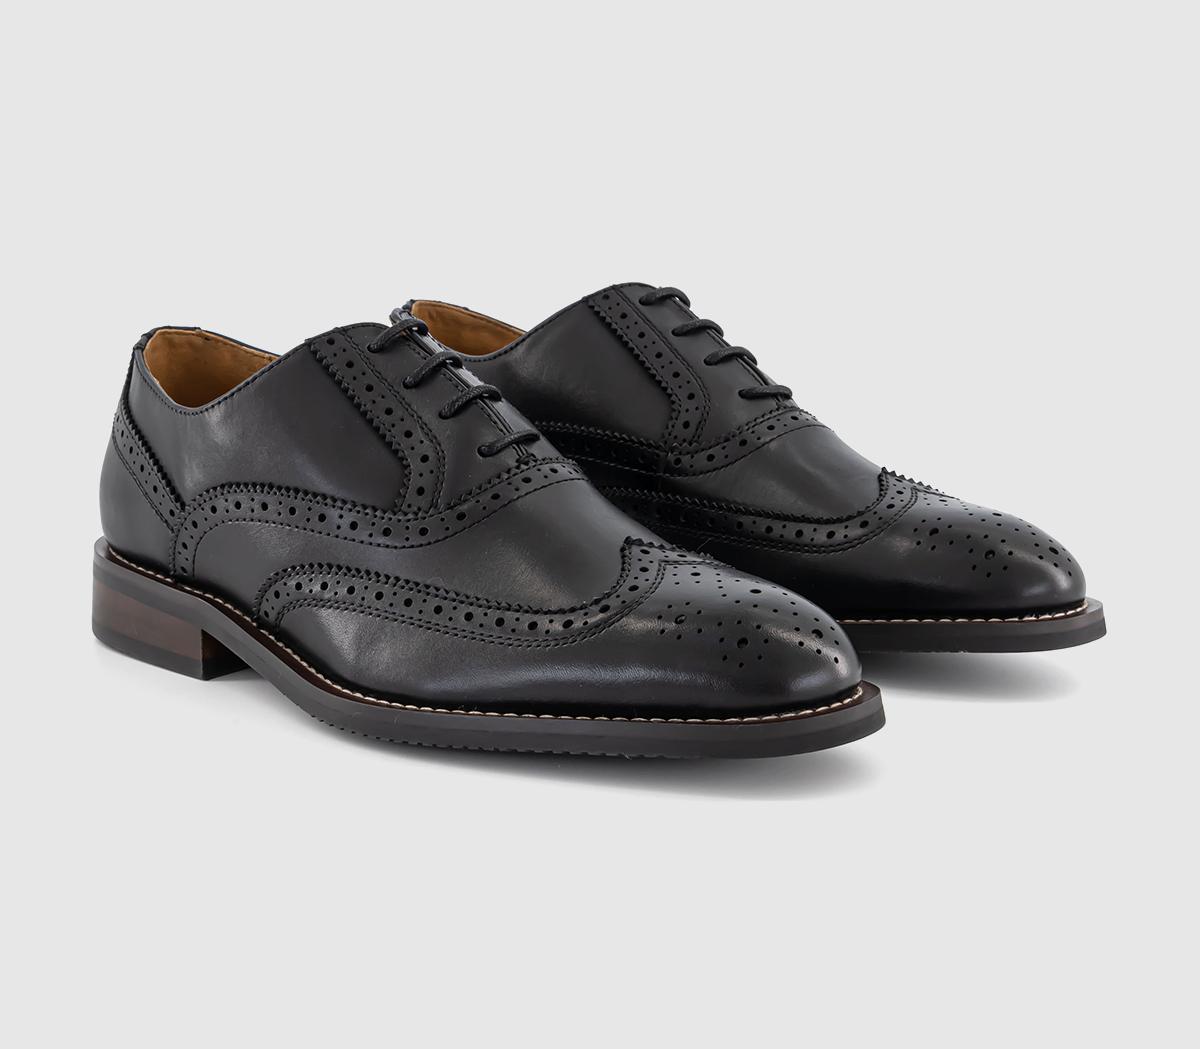 OFFICE Mens Mariner Wingcap Brogue Shoes Black Leather, 12